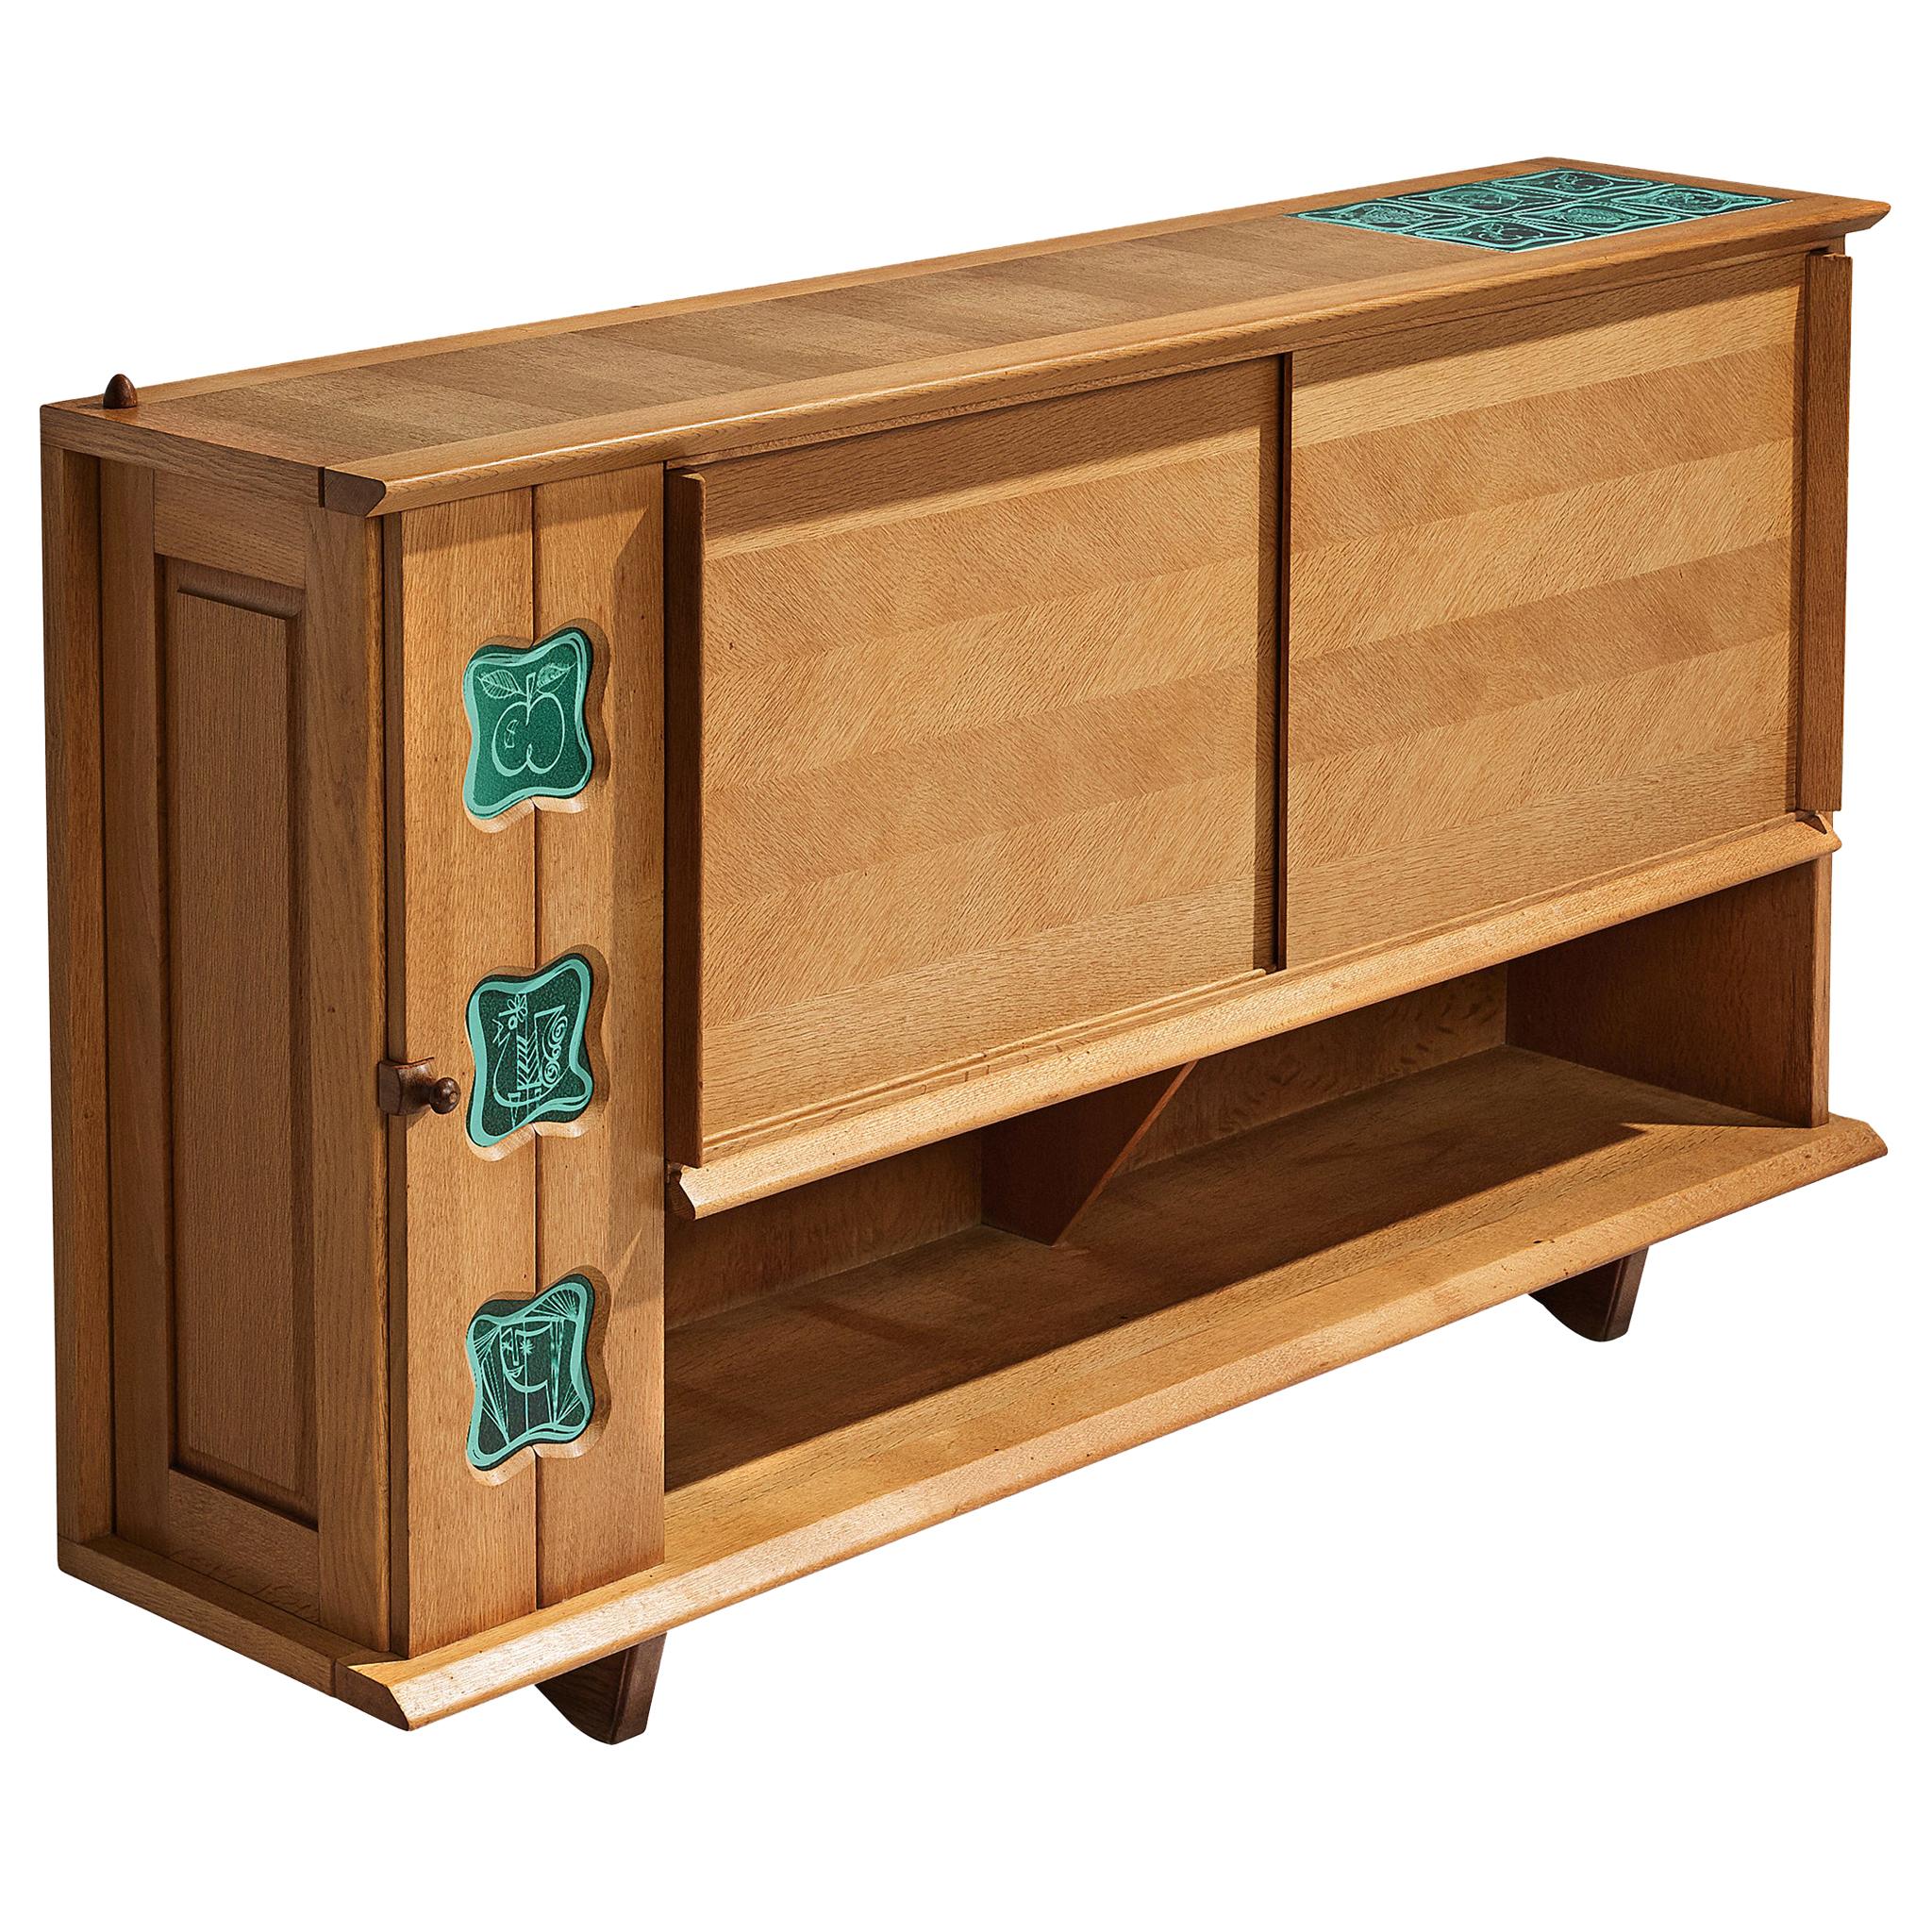 Guillerme and Chambron Buffet in Oak with Ceramic Details